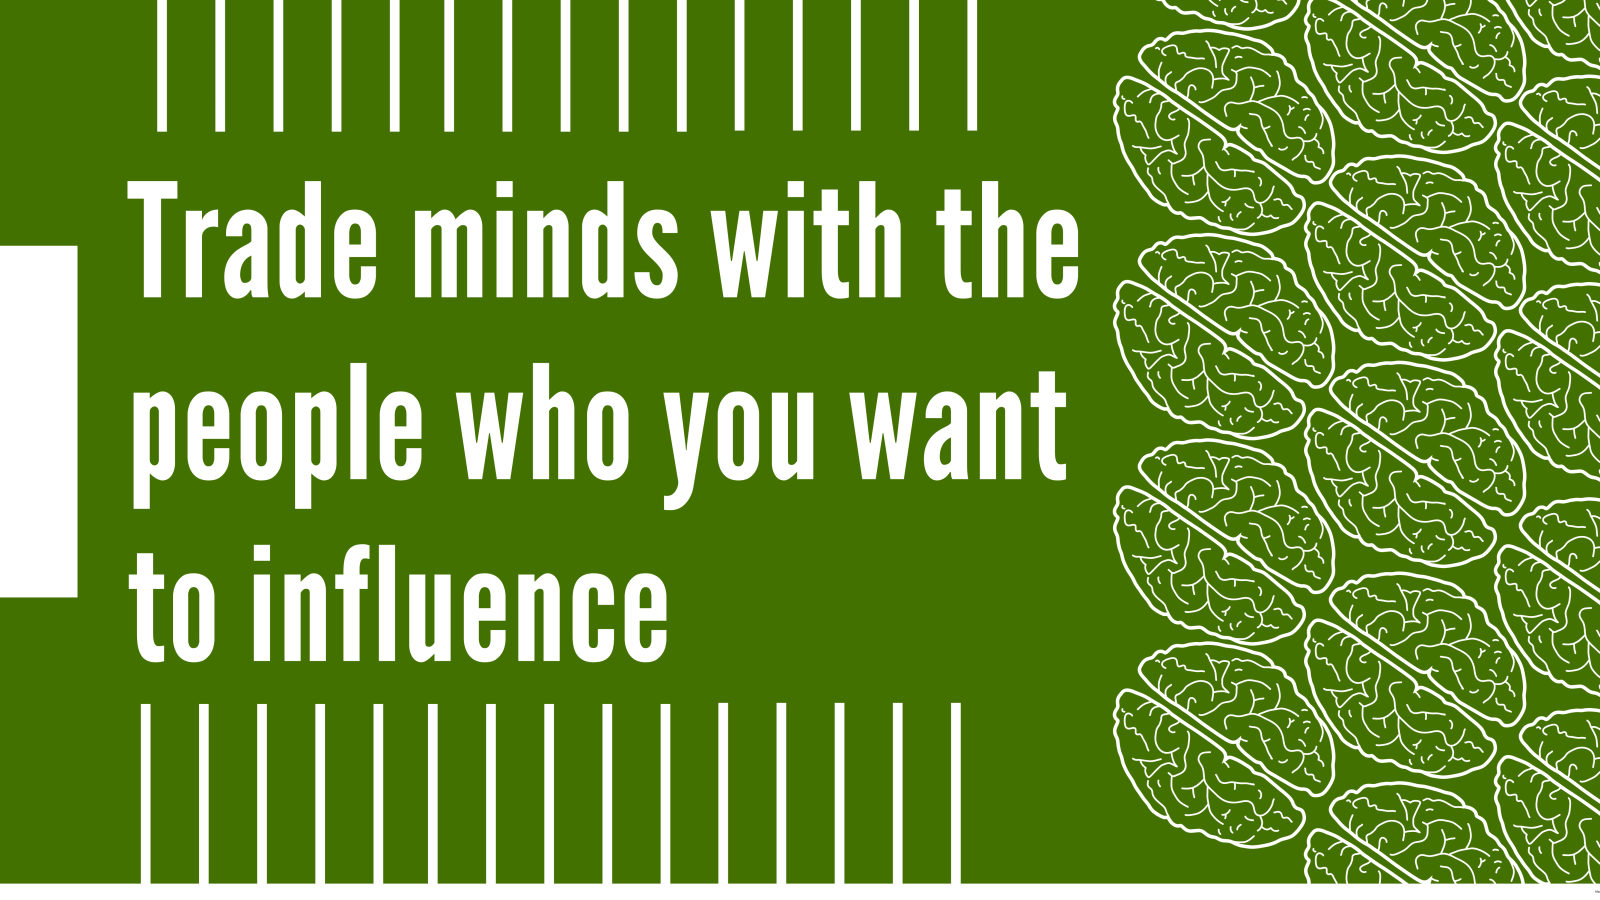 Trade minds with the people who you want to influence